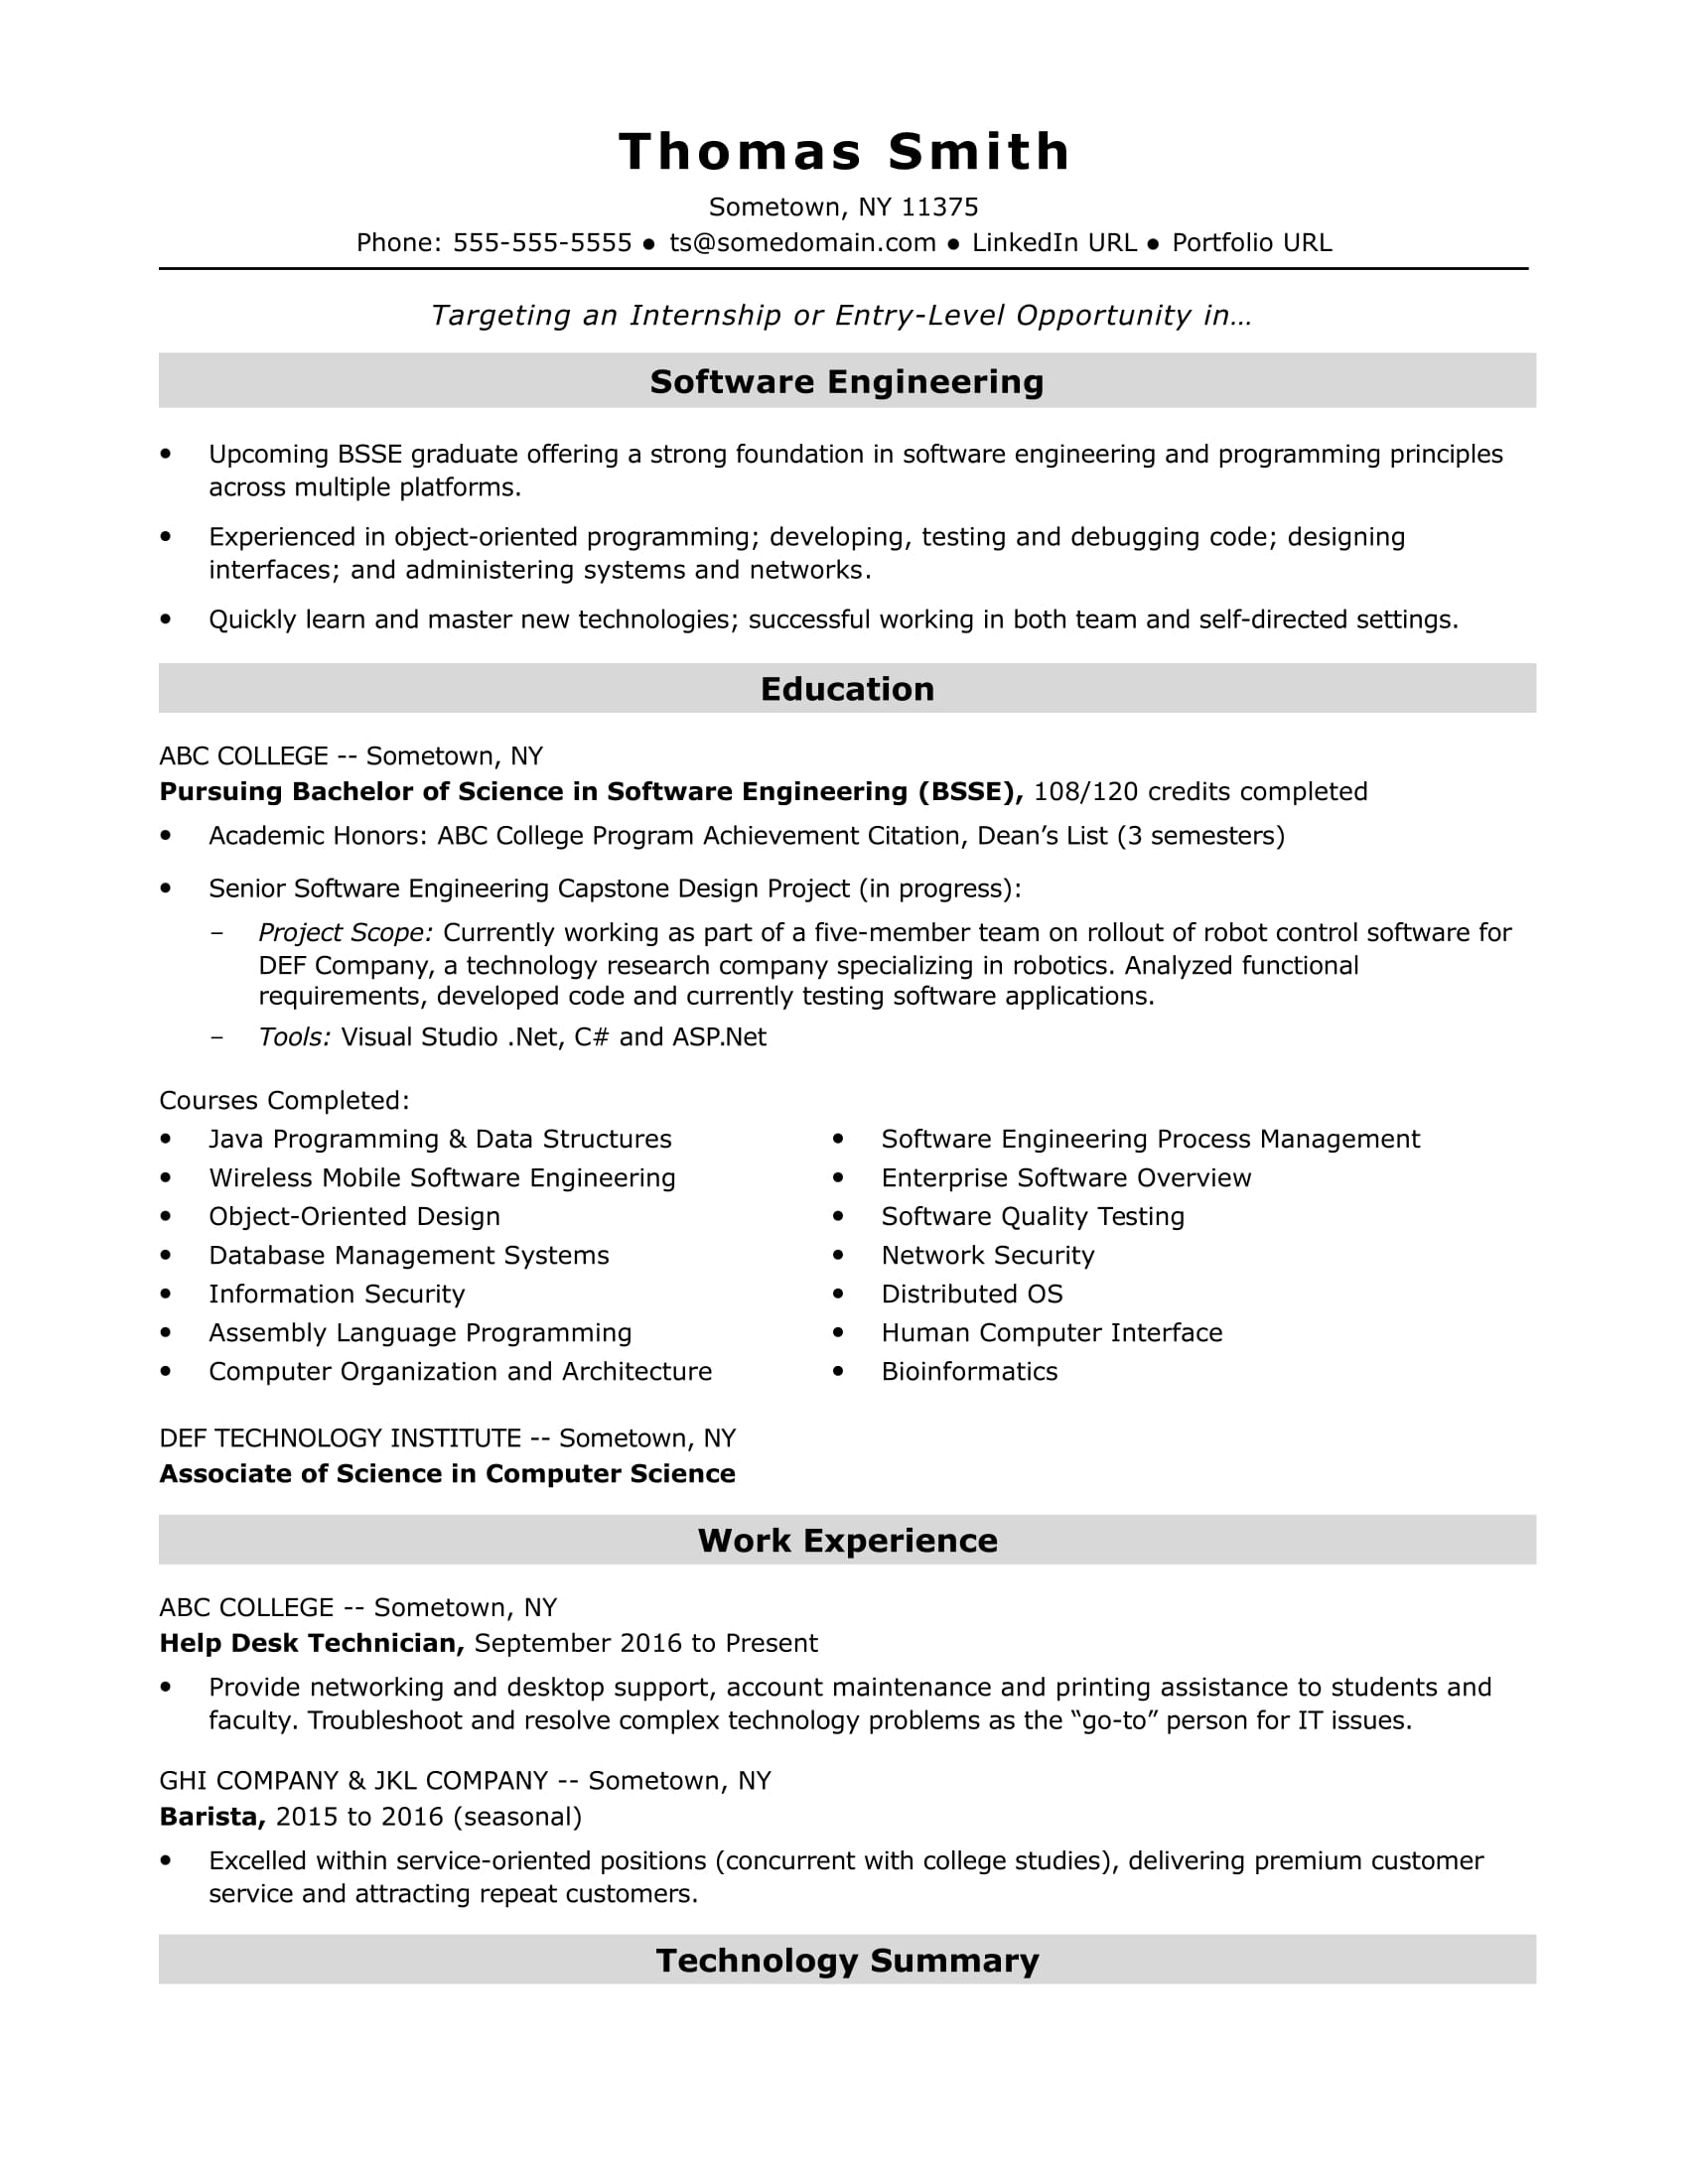 Computer engineering resume cover letter science